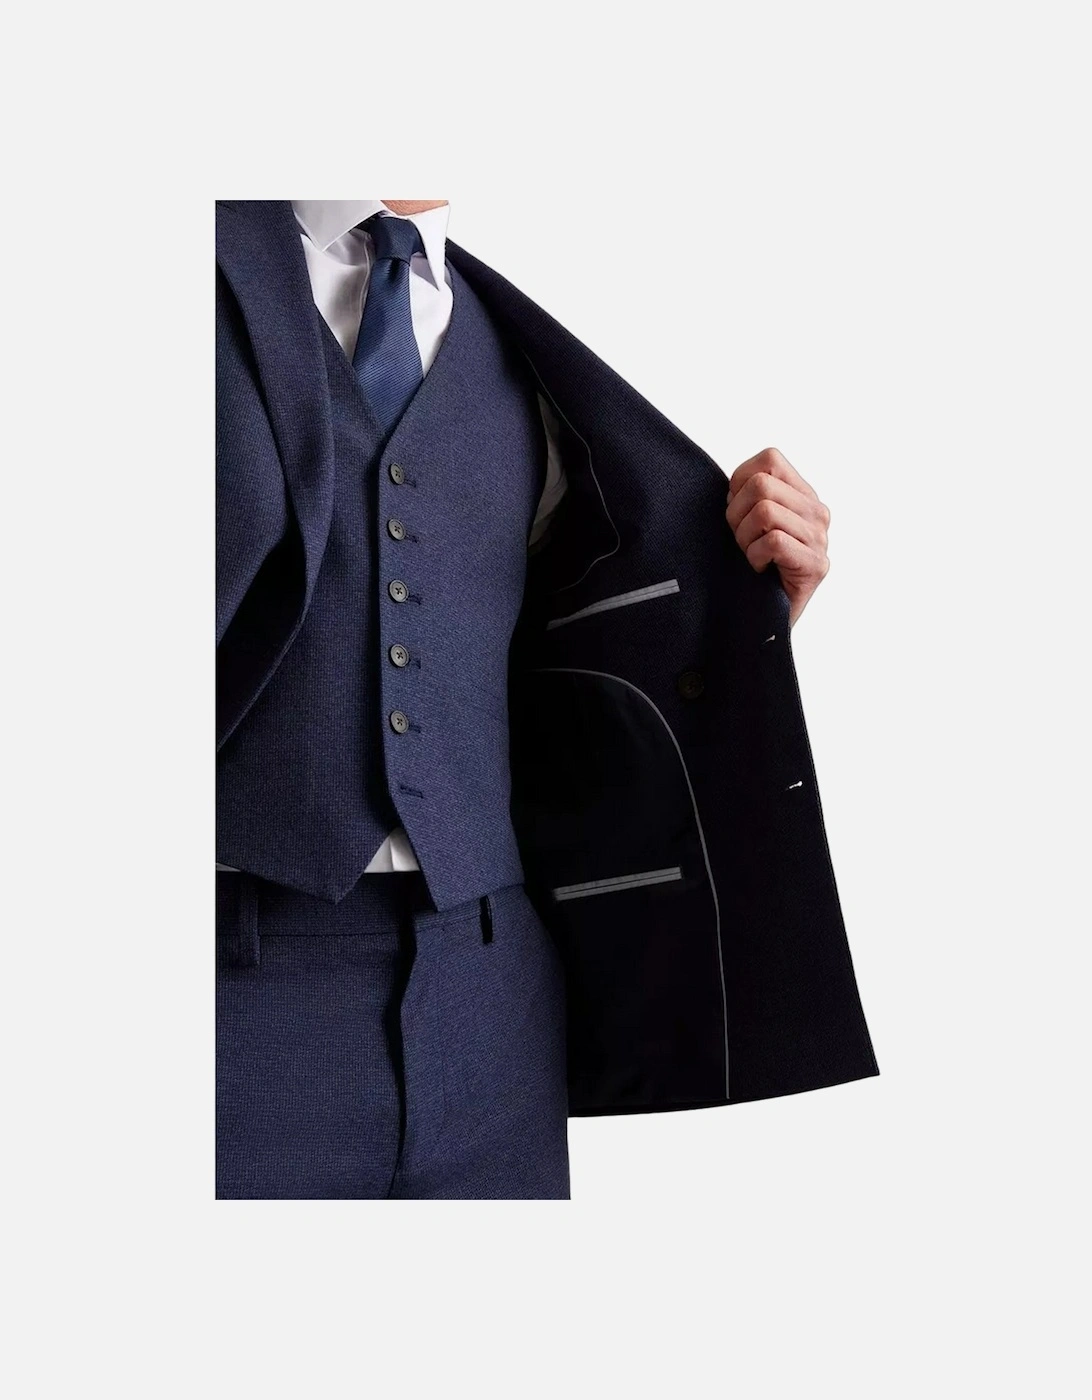 Mens Double-Breasted Slim Suit Jacket